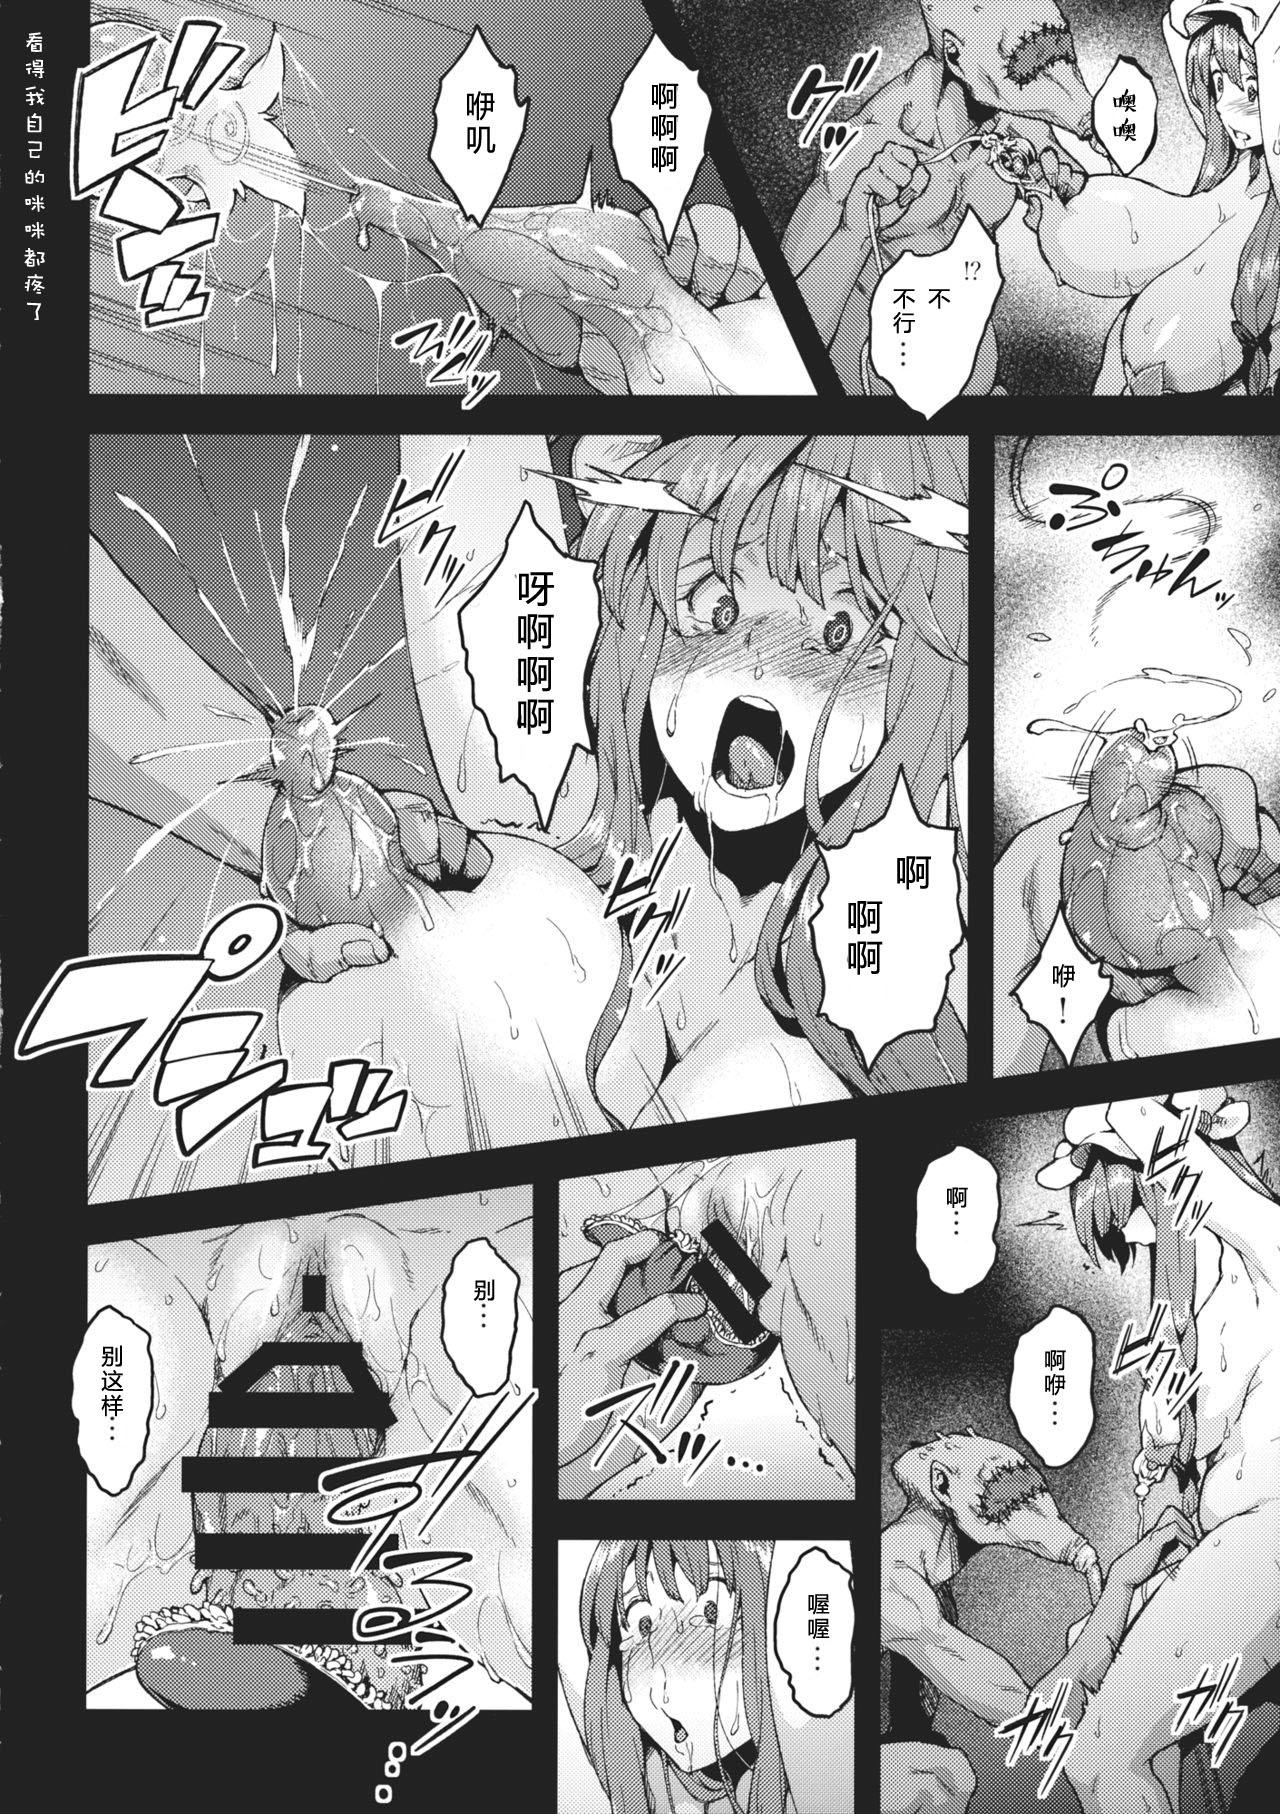 Role Play Pache Otoshi after II - Touhou project Super Hot Porn - Page 7